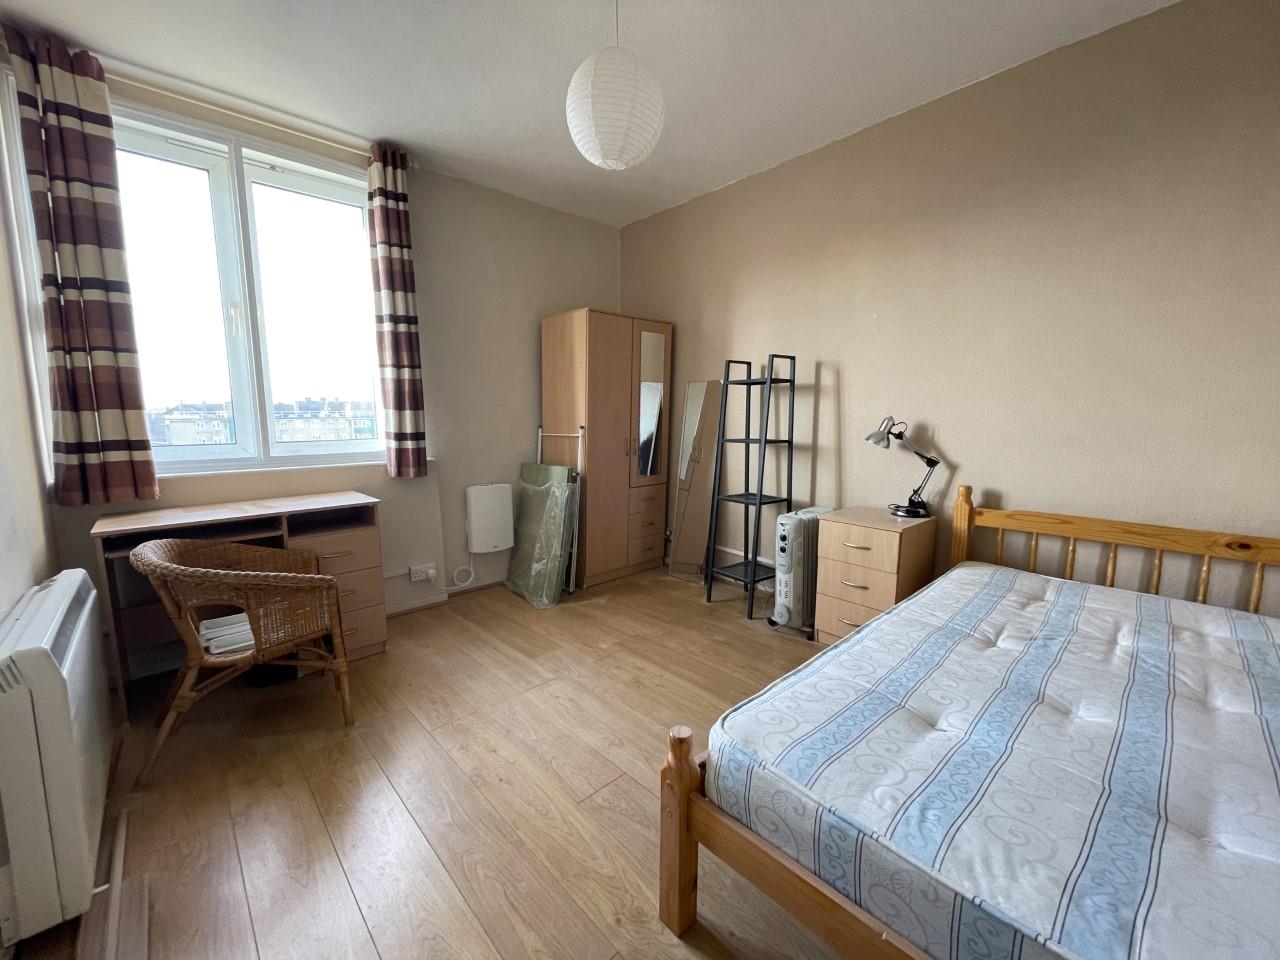 AVAILABLE IMMEDIATELY AND PERFECT FOR STUDENTS!<BR>Sixth floor purpose built flat (with lift) located in a prime location minutes from Mornington Crescent, Euston and Warren Street Stations.  UCH, UCL and  Birkbeck are all easily accessible as well as Regents Park and Tottenham Court ...